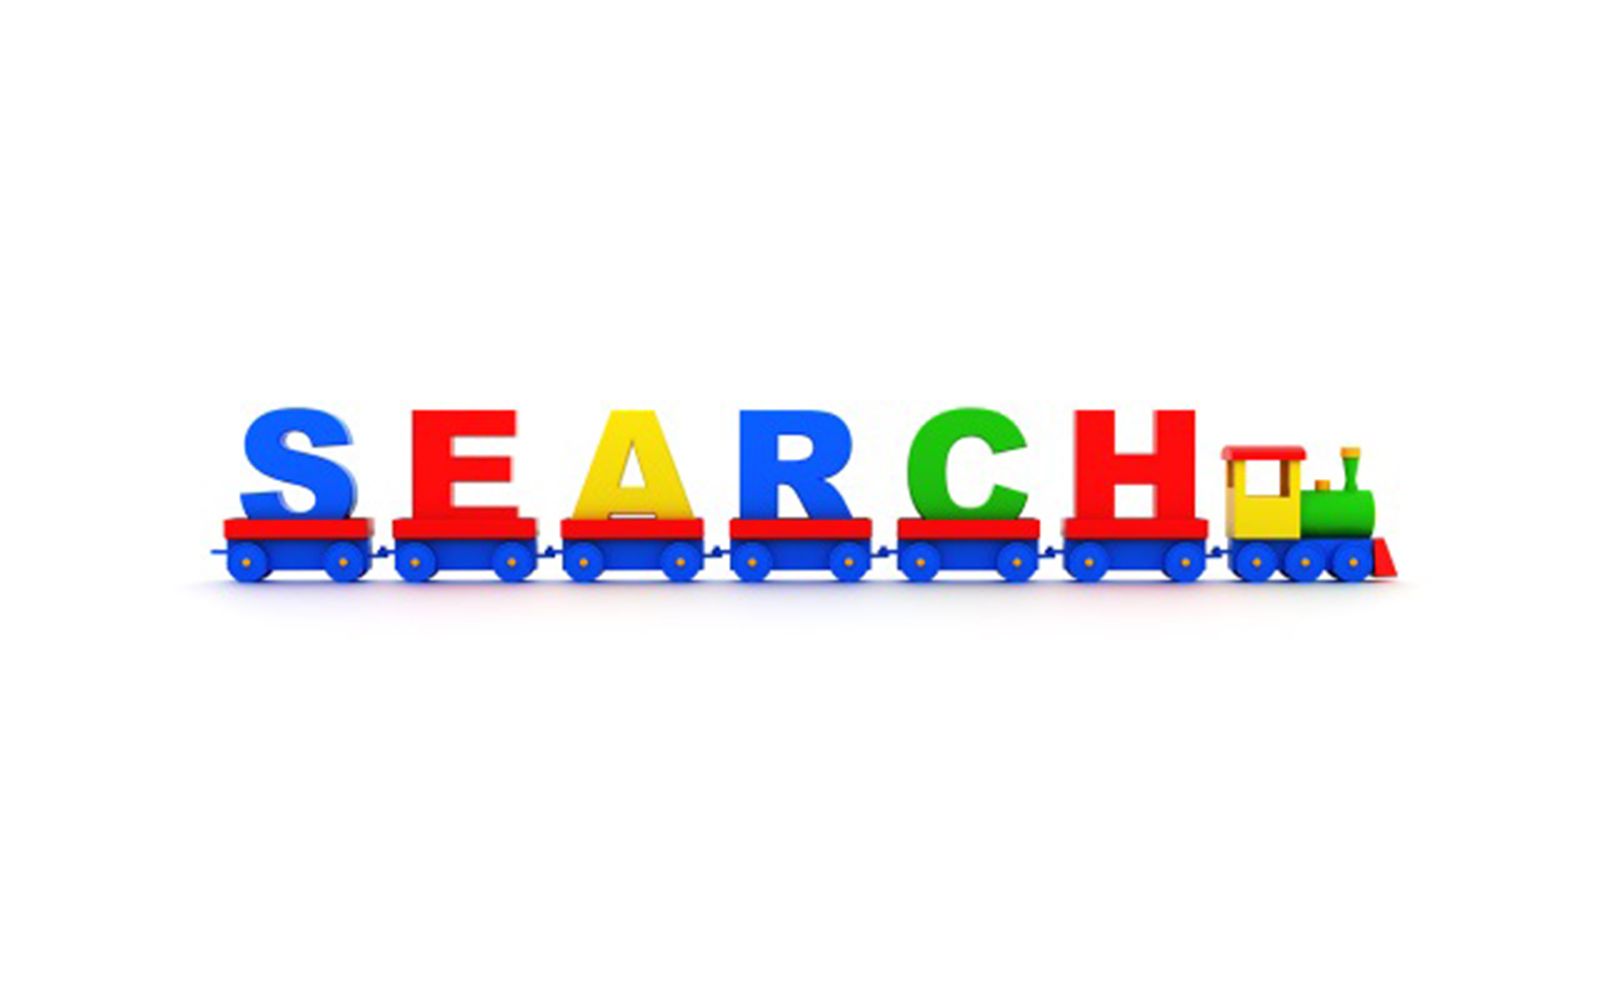 google working on versions of its search engine and youtube for children image 1